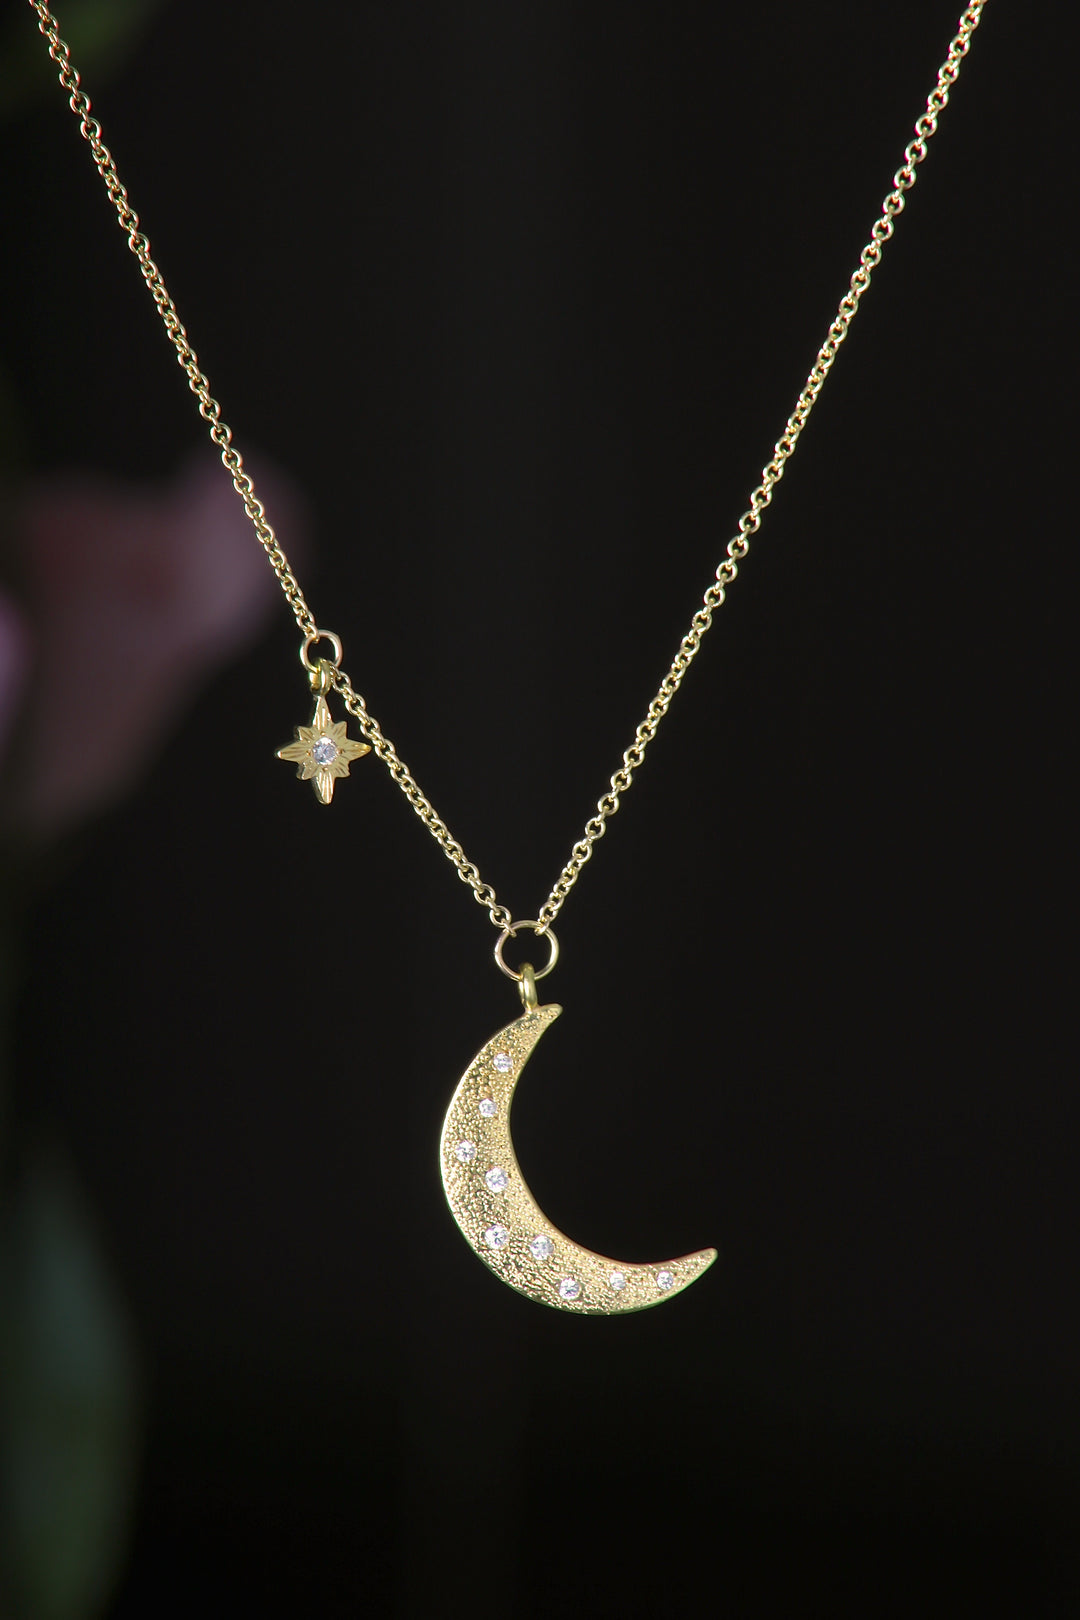 Crescent Moon and Star Charm Necklace (08826)